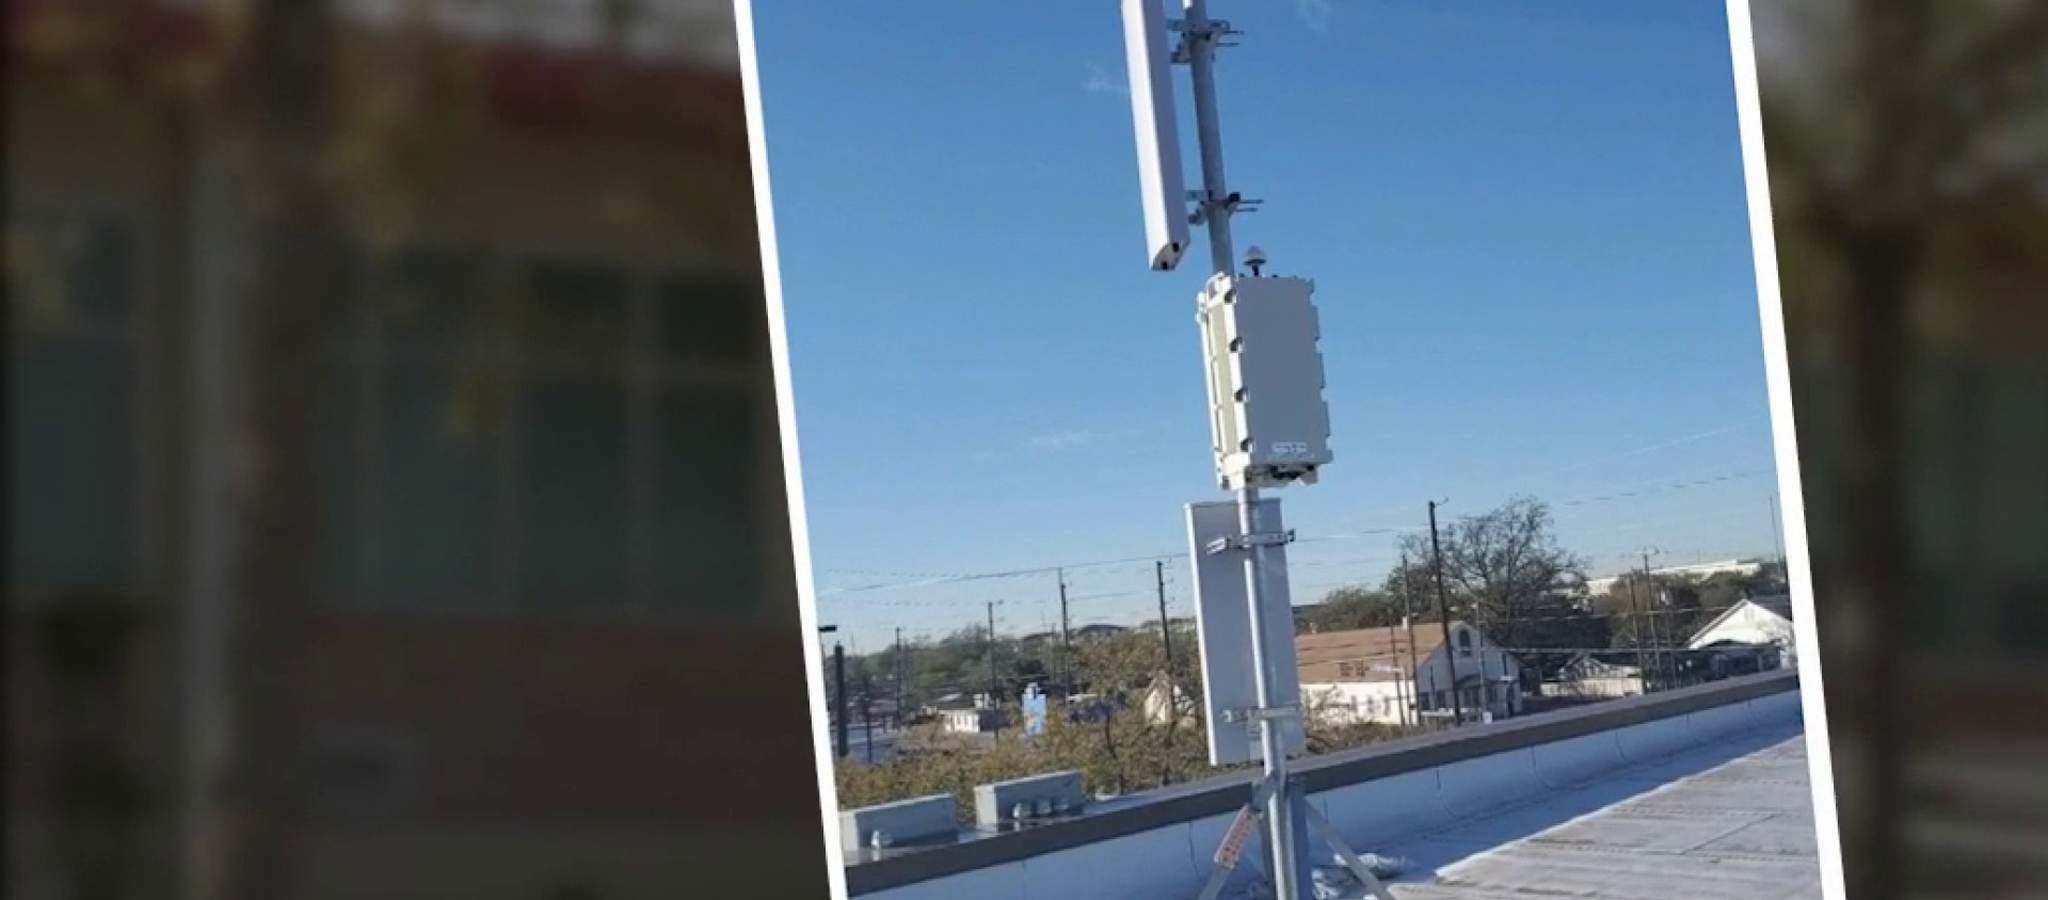 Harlandale ISD installing cell towers throughout community to help students overcome digital divide